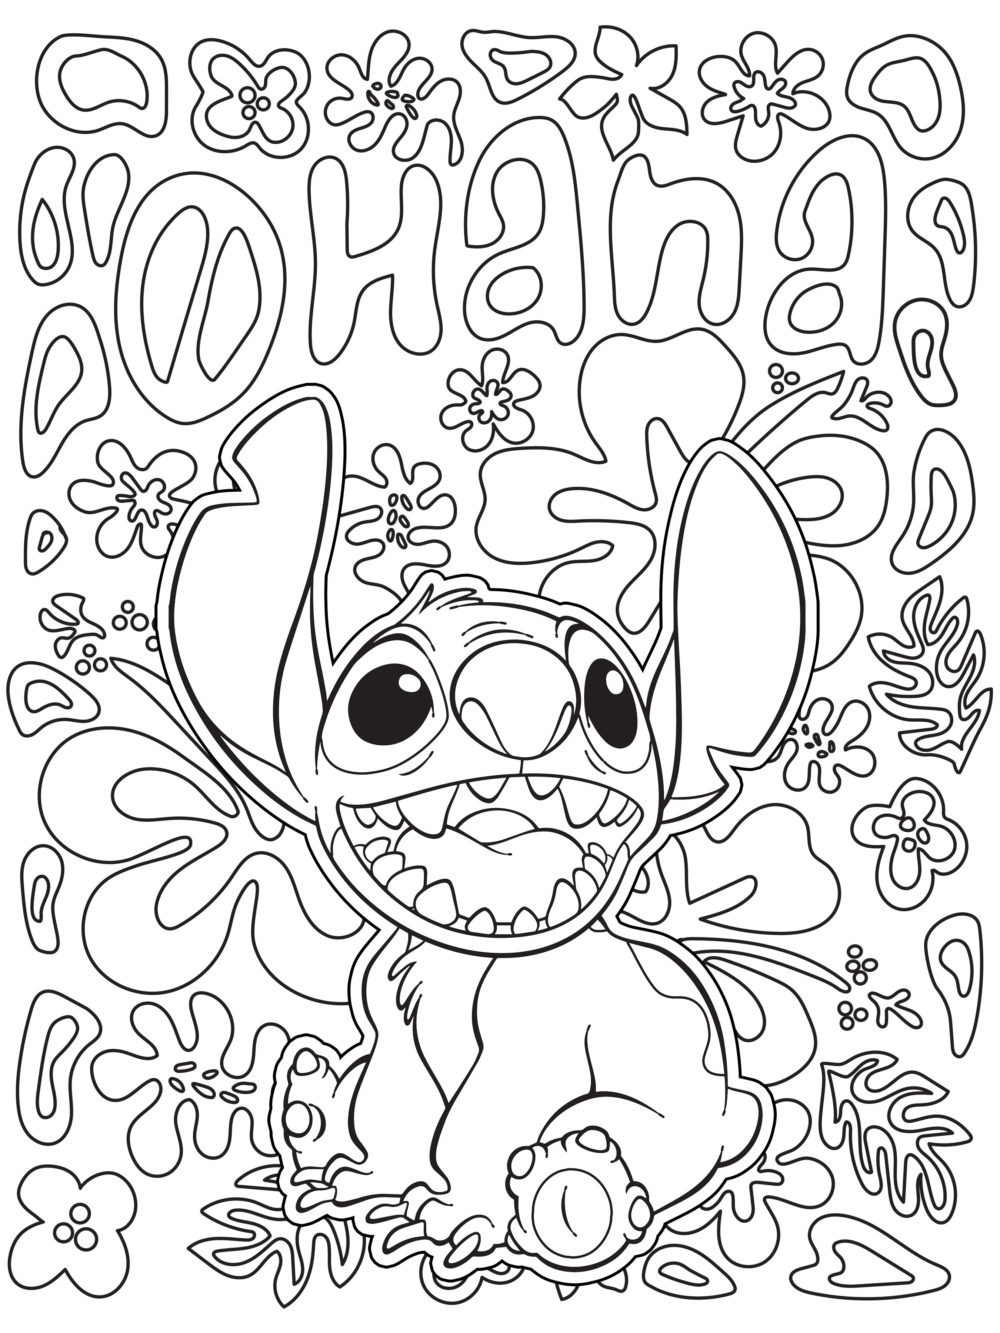 Interactive Coloring Pages Interactive Coloring Pages For Adults Fresh Celebrate National